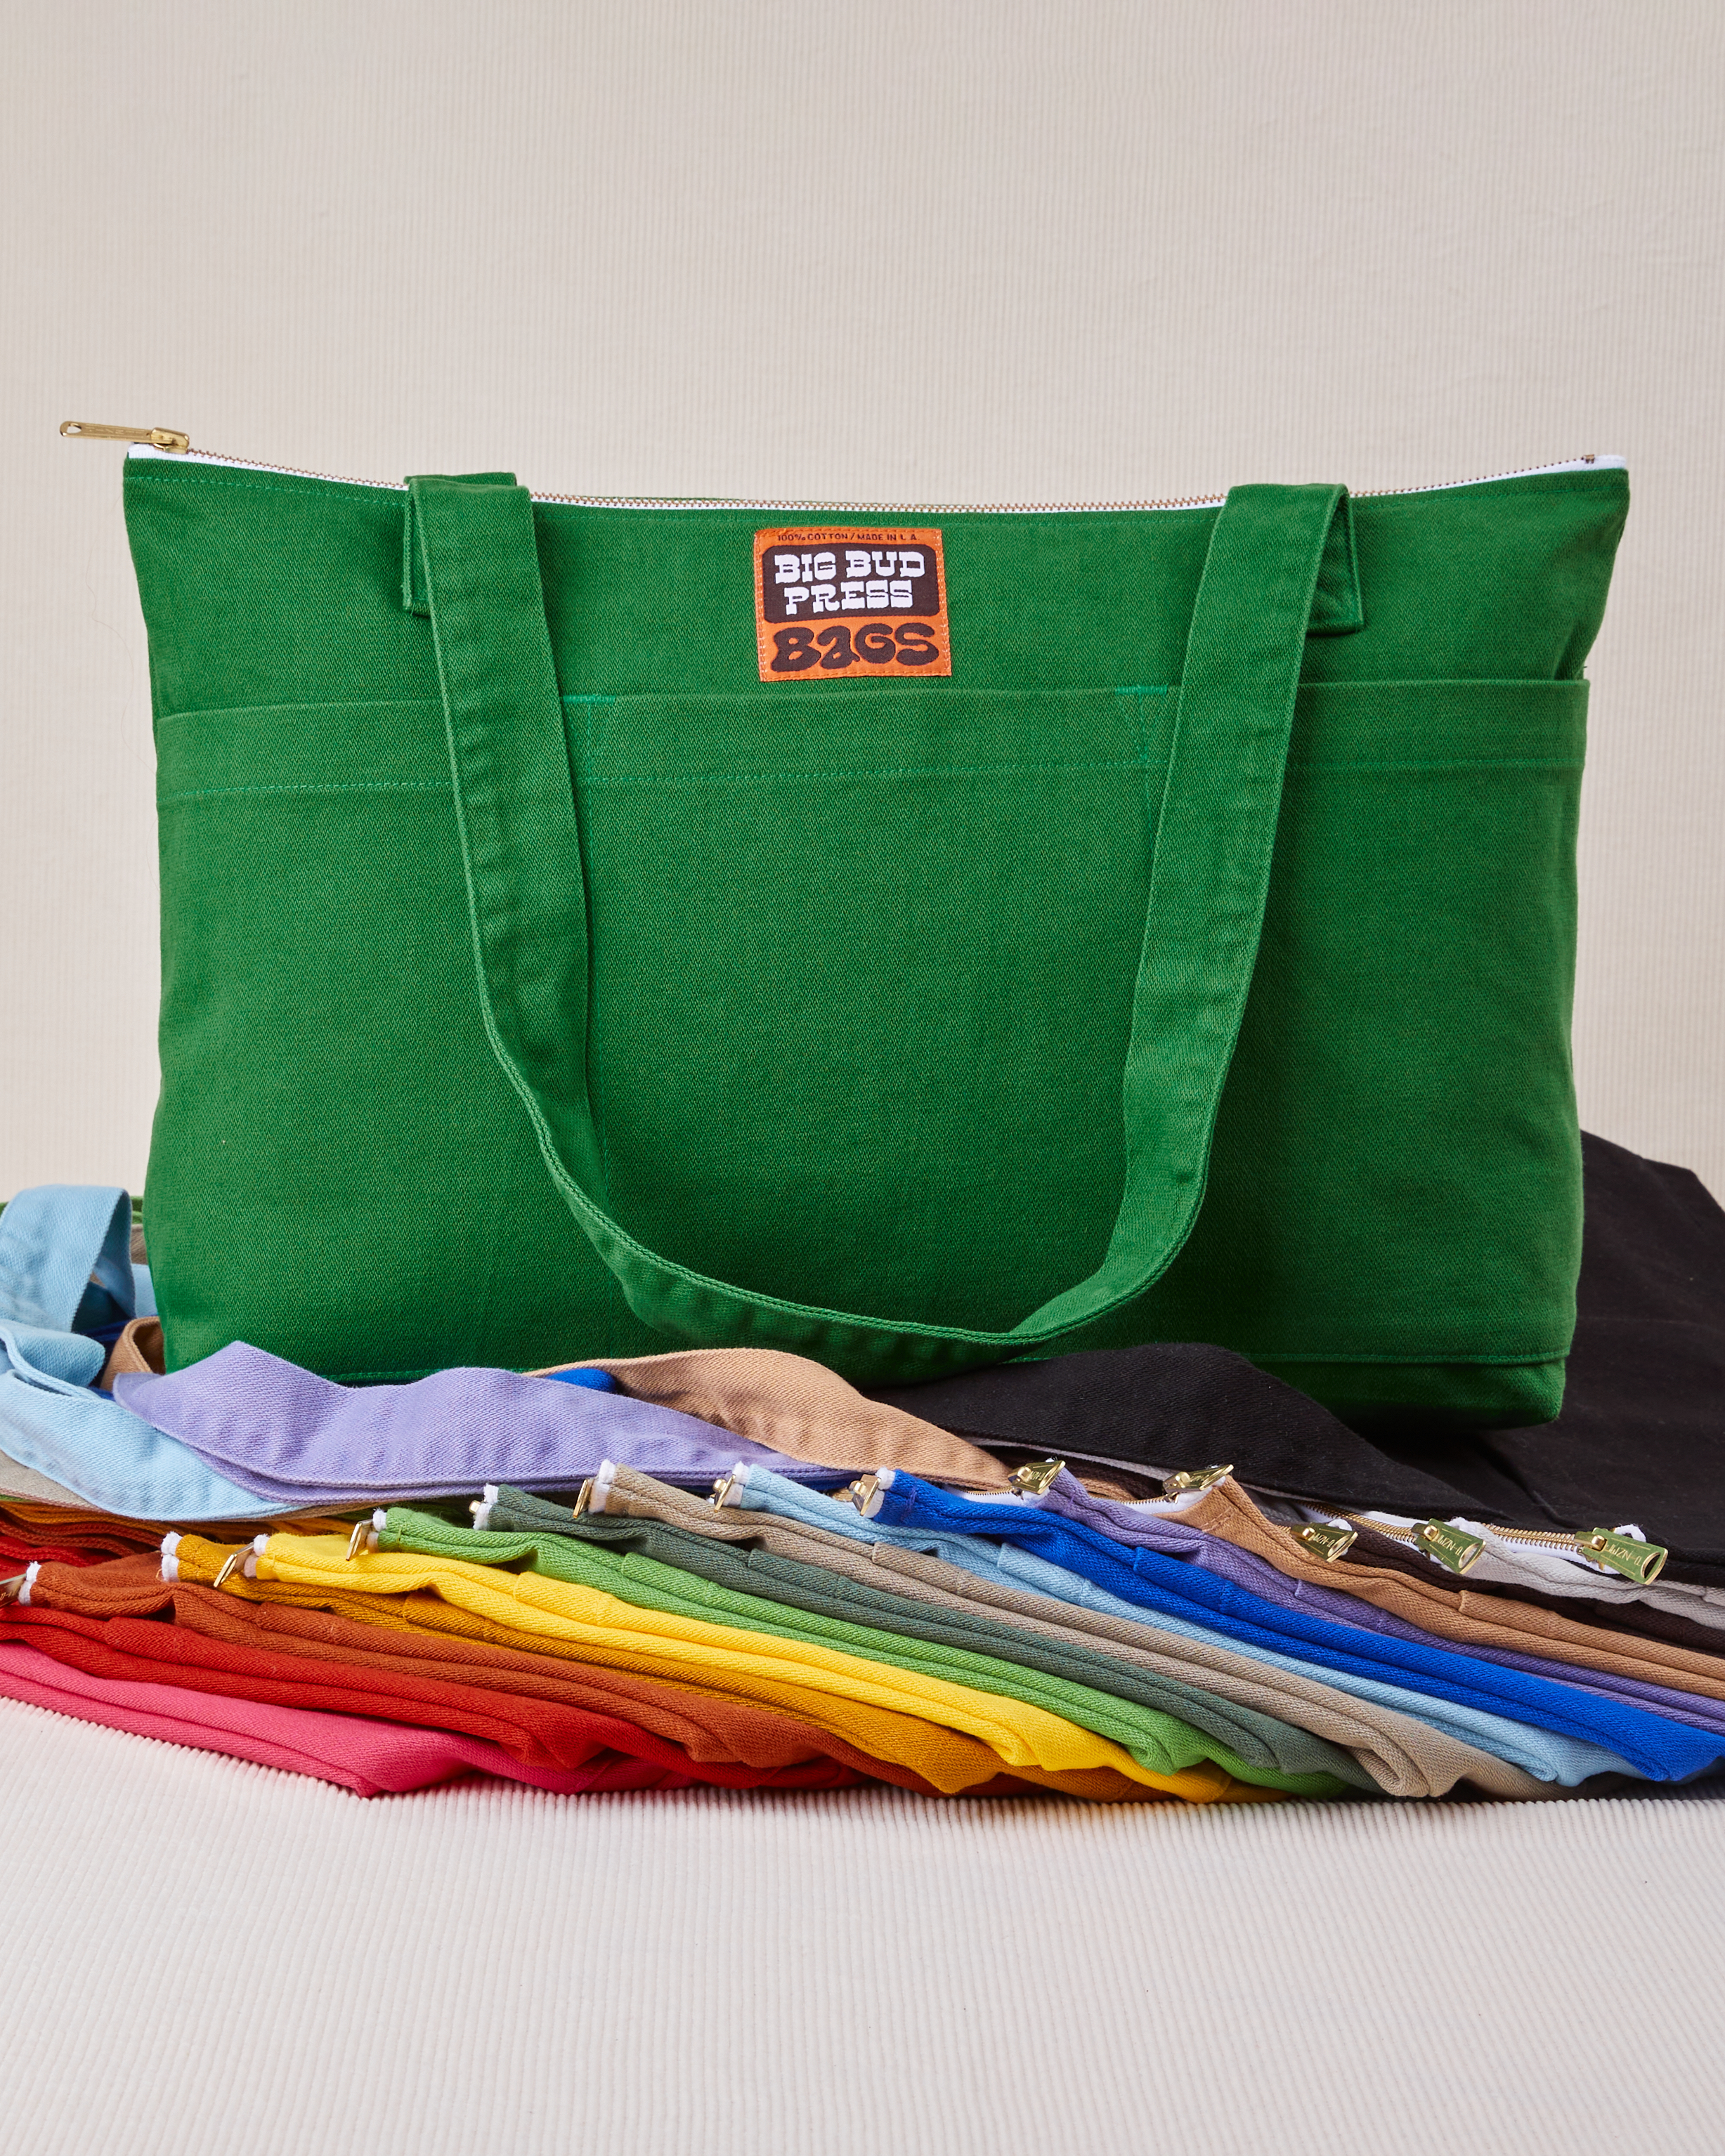 XL Zip Tote in forest green sitting on top of other colors laid flat